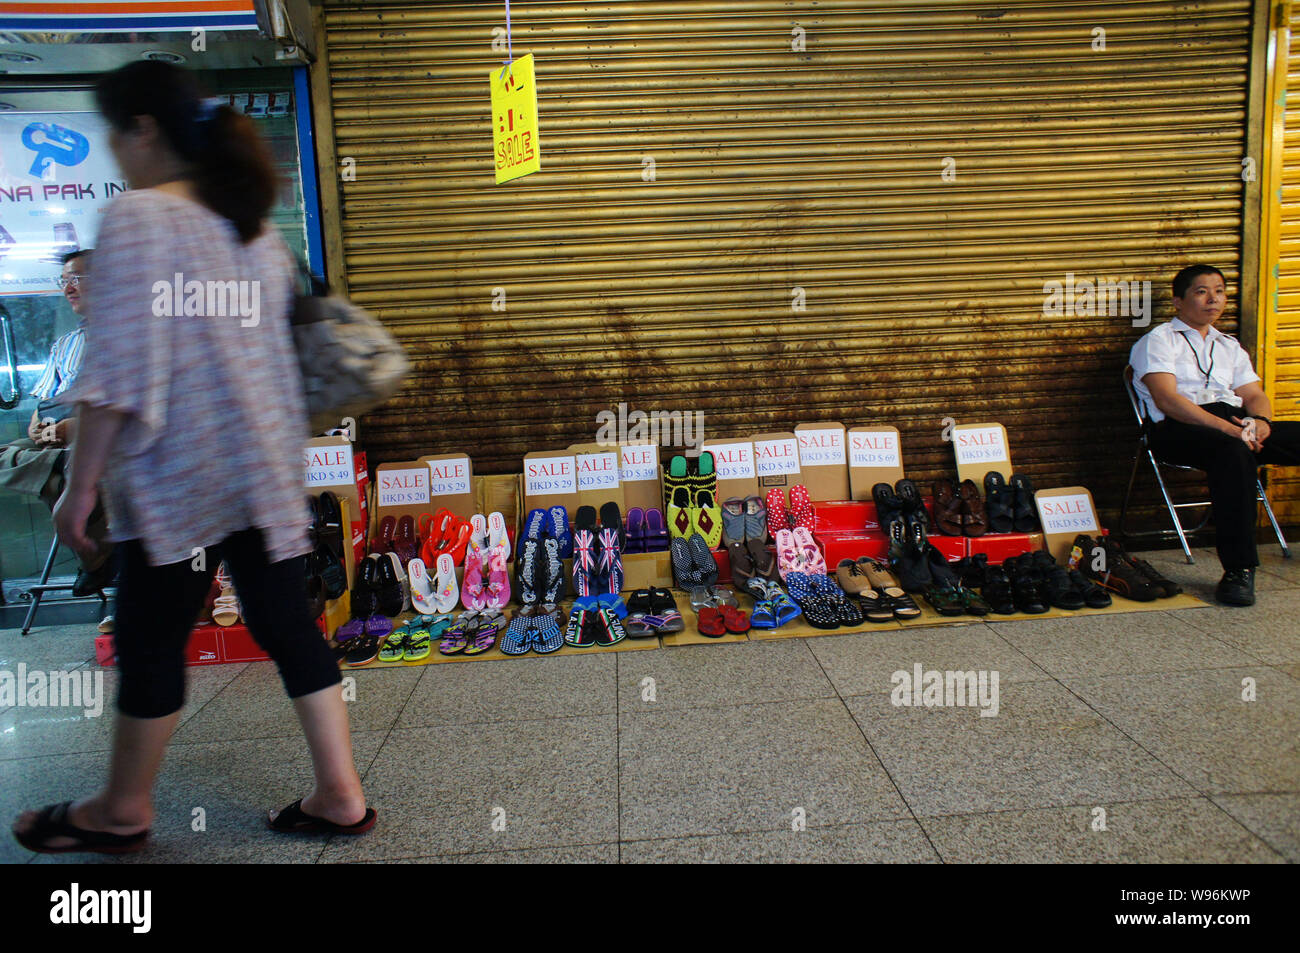 A Woman Walks Past A Vendor Selling Shoes And Slippers In